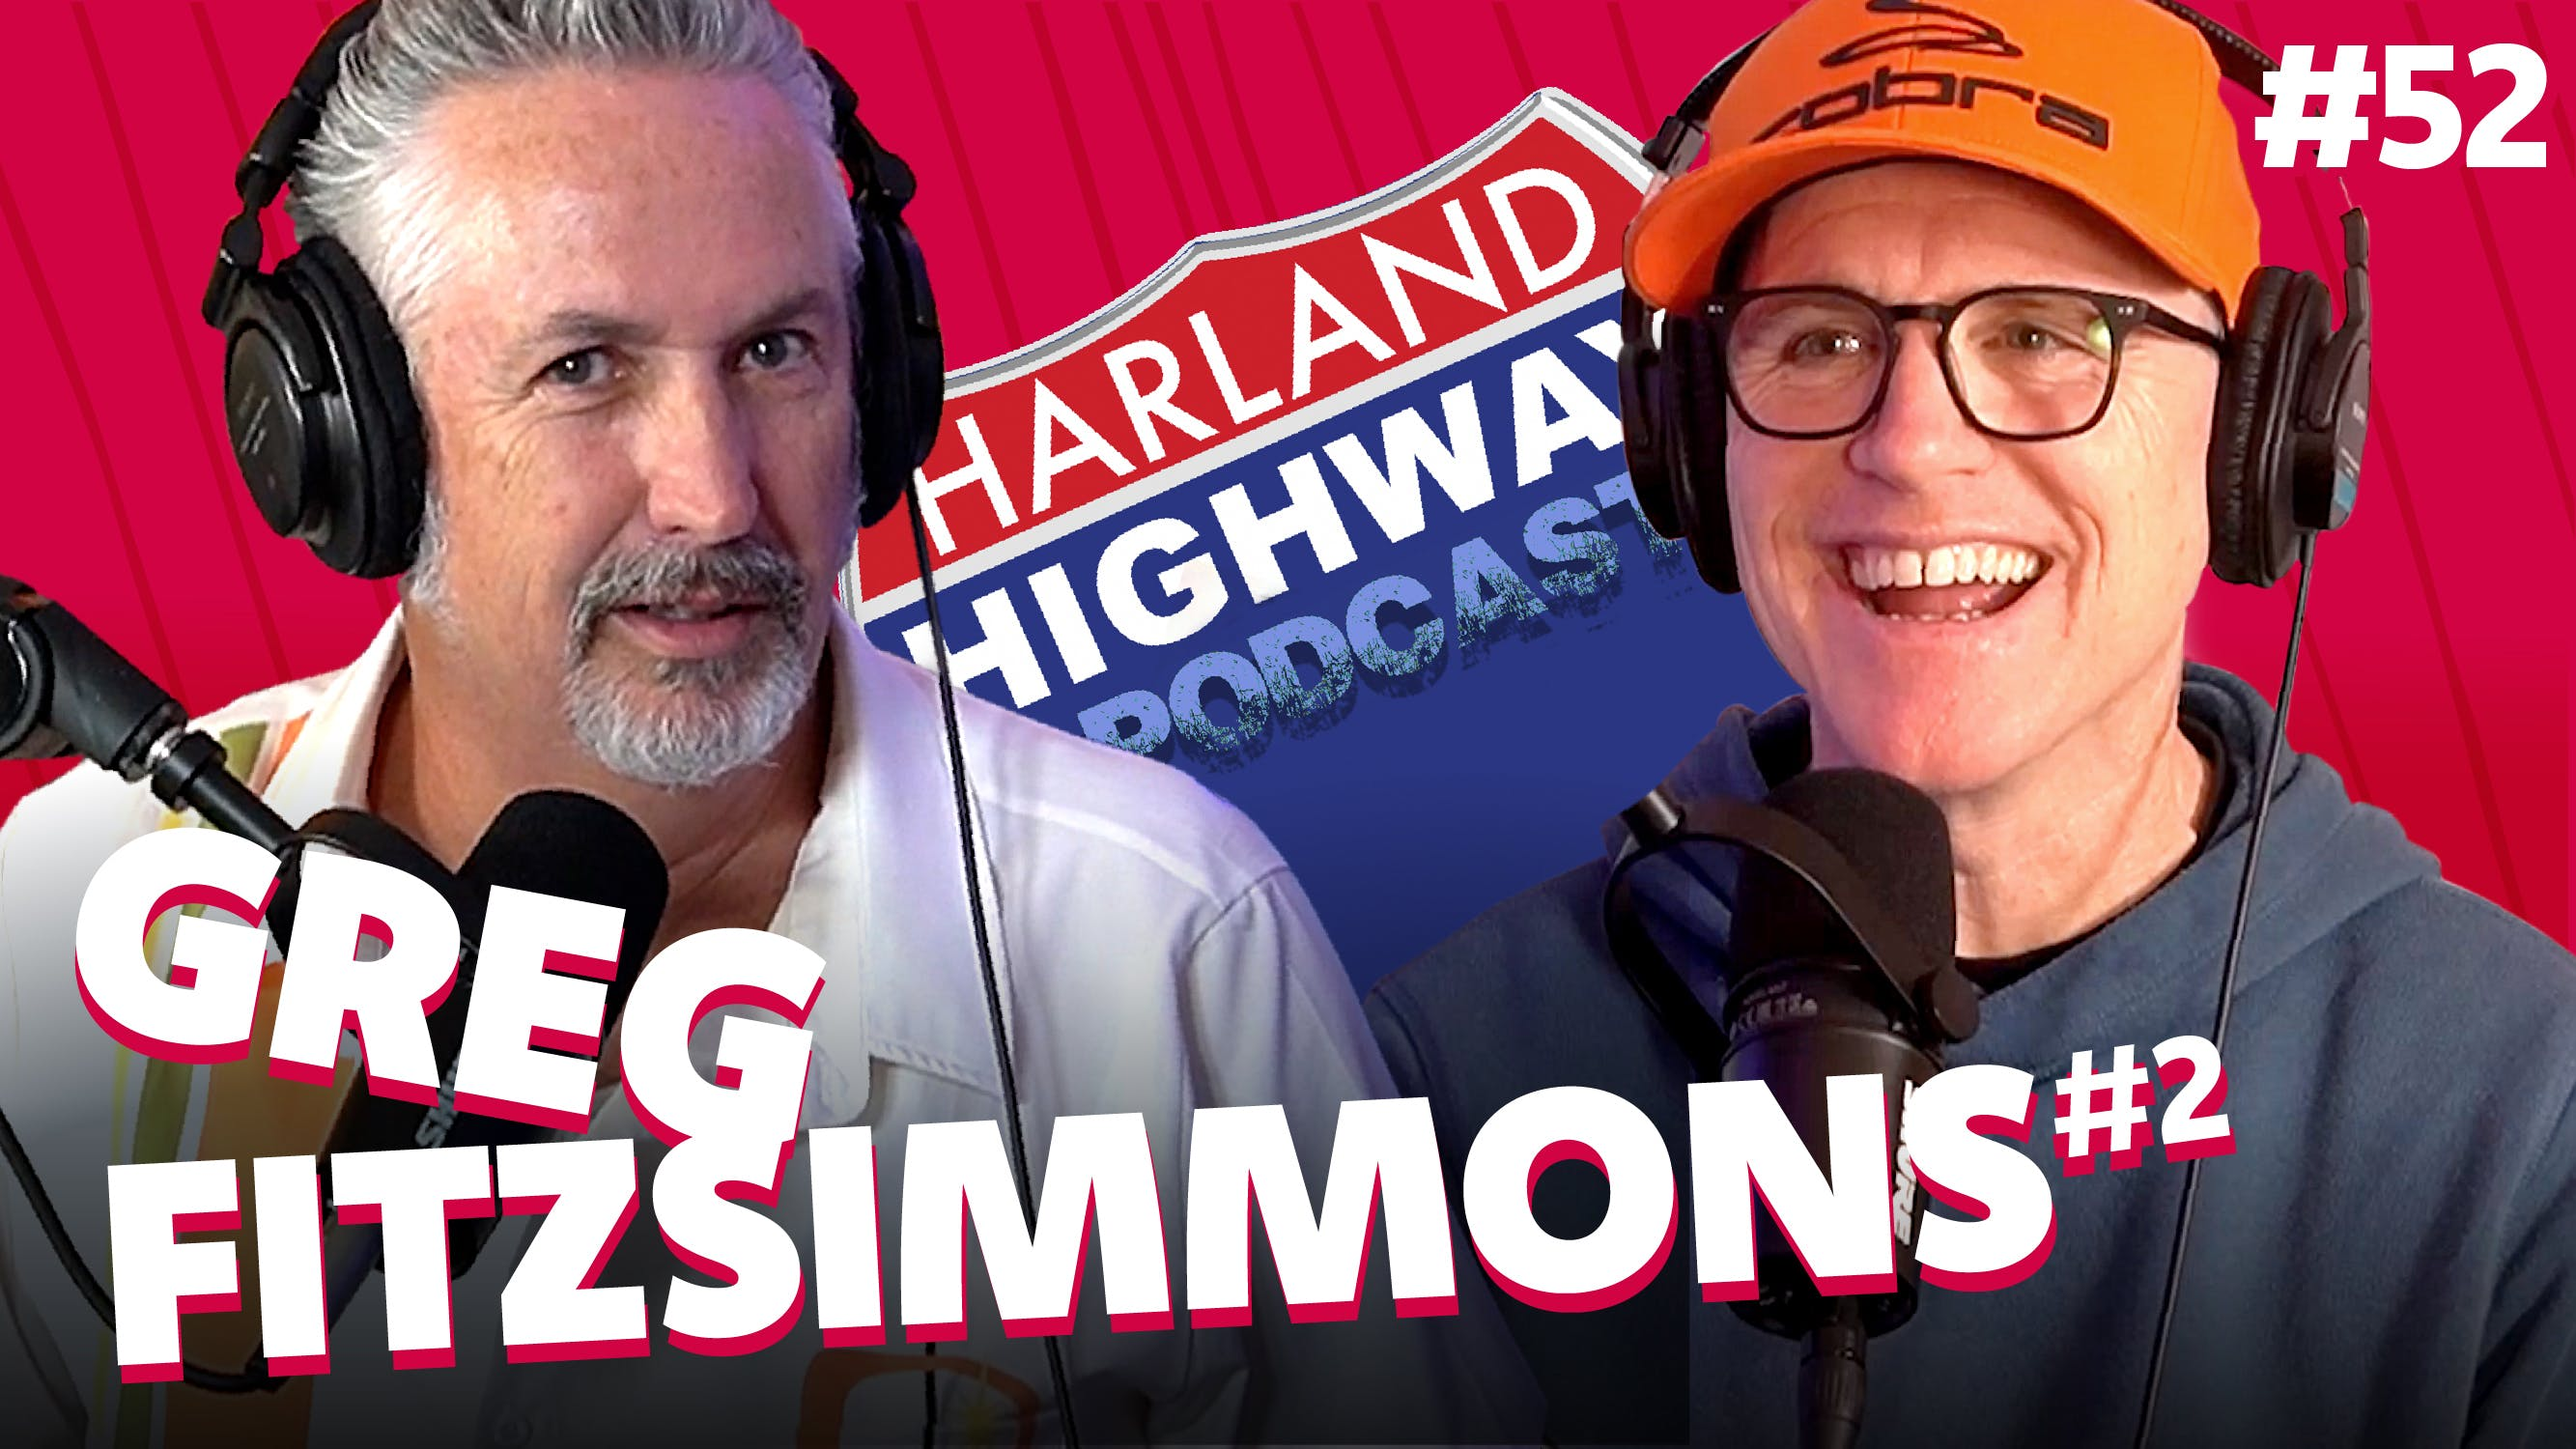 NEW HARLAND HIGHWAY #52 - GREG FITZSIMMONS, Comedian, Actor, Writer, Podcaster.